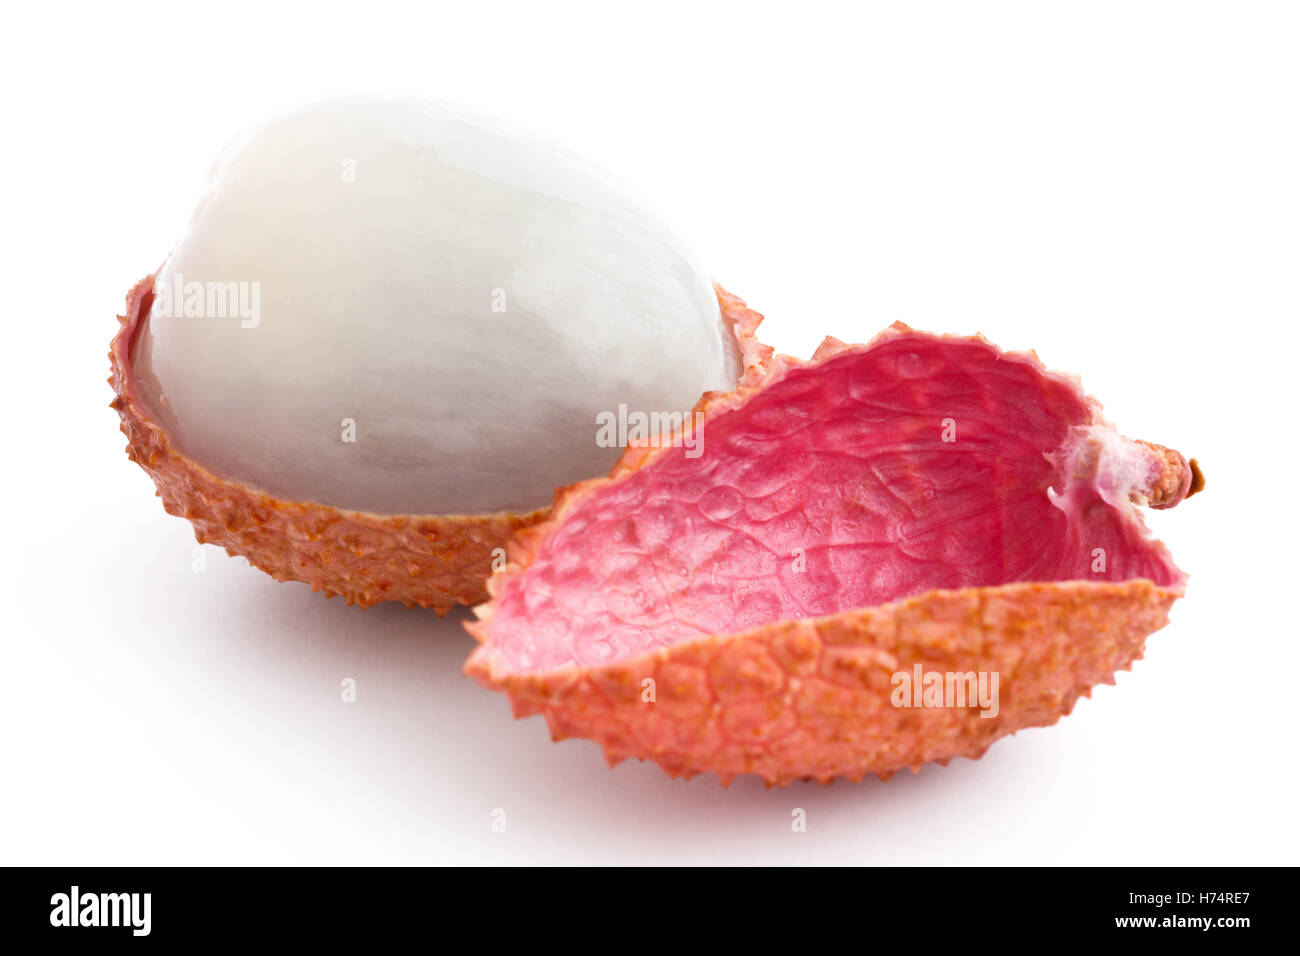 Single litchi with skin removed and flesh. On white. Stock Photo